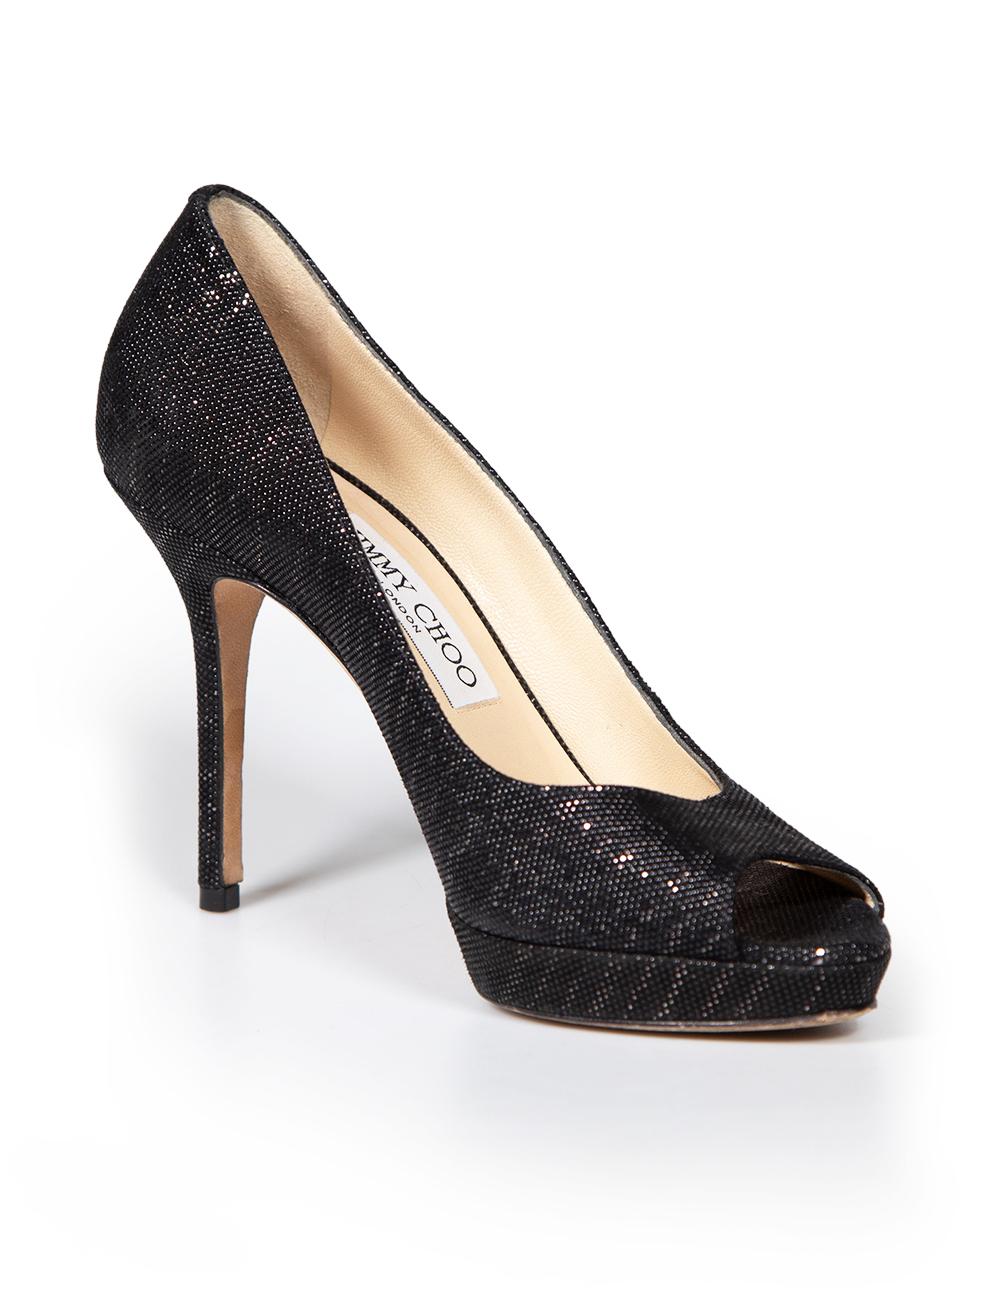 CONDITION is Very good. Minimal wear to heels is evident. Minimal wear to soles of both shoes on this used Jimmy Choo designer resale item.
 
 
 
 Details
 
 
 Black
 
 Cloth textile
 
 Heels
 
 Peep toe
 
 High heeled
 
 Platform
 
 Metallic